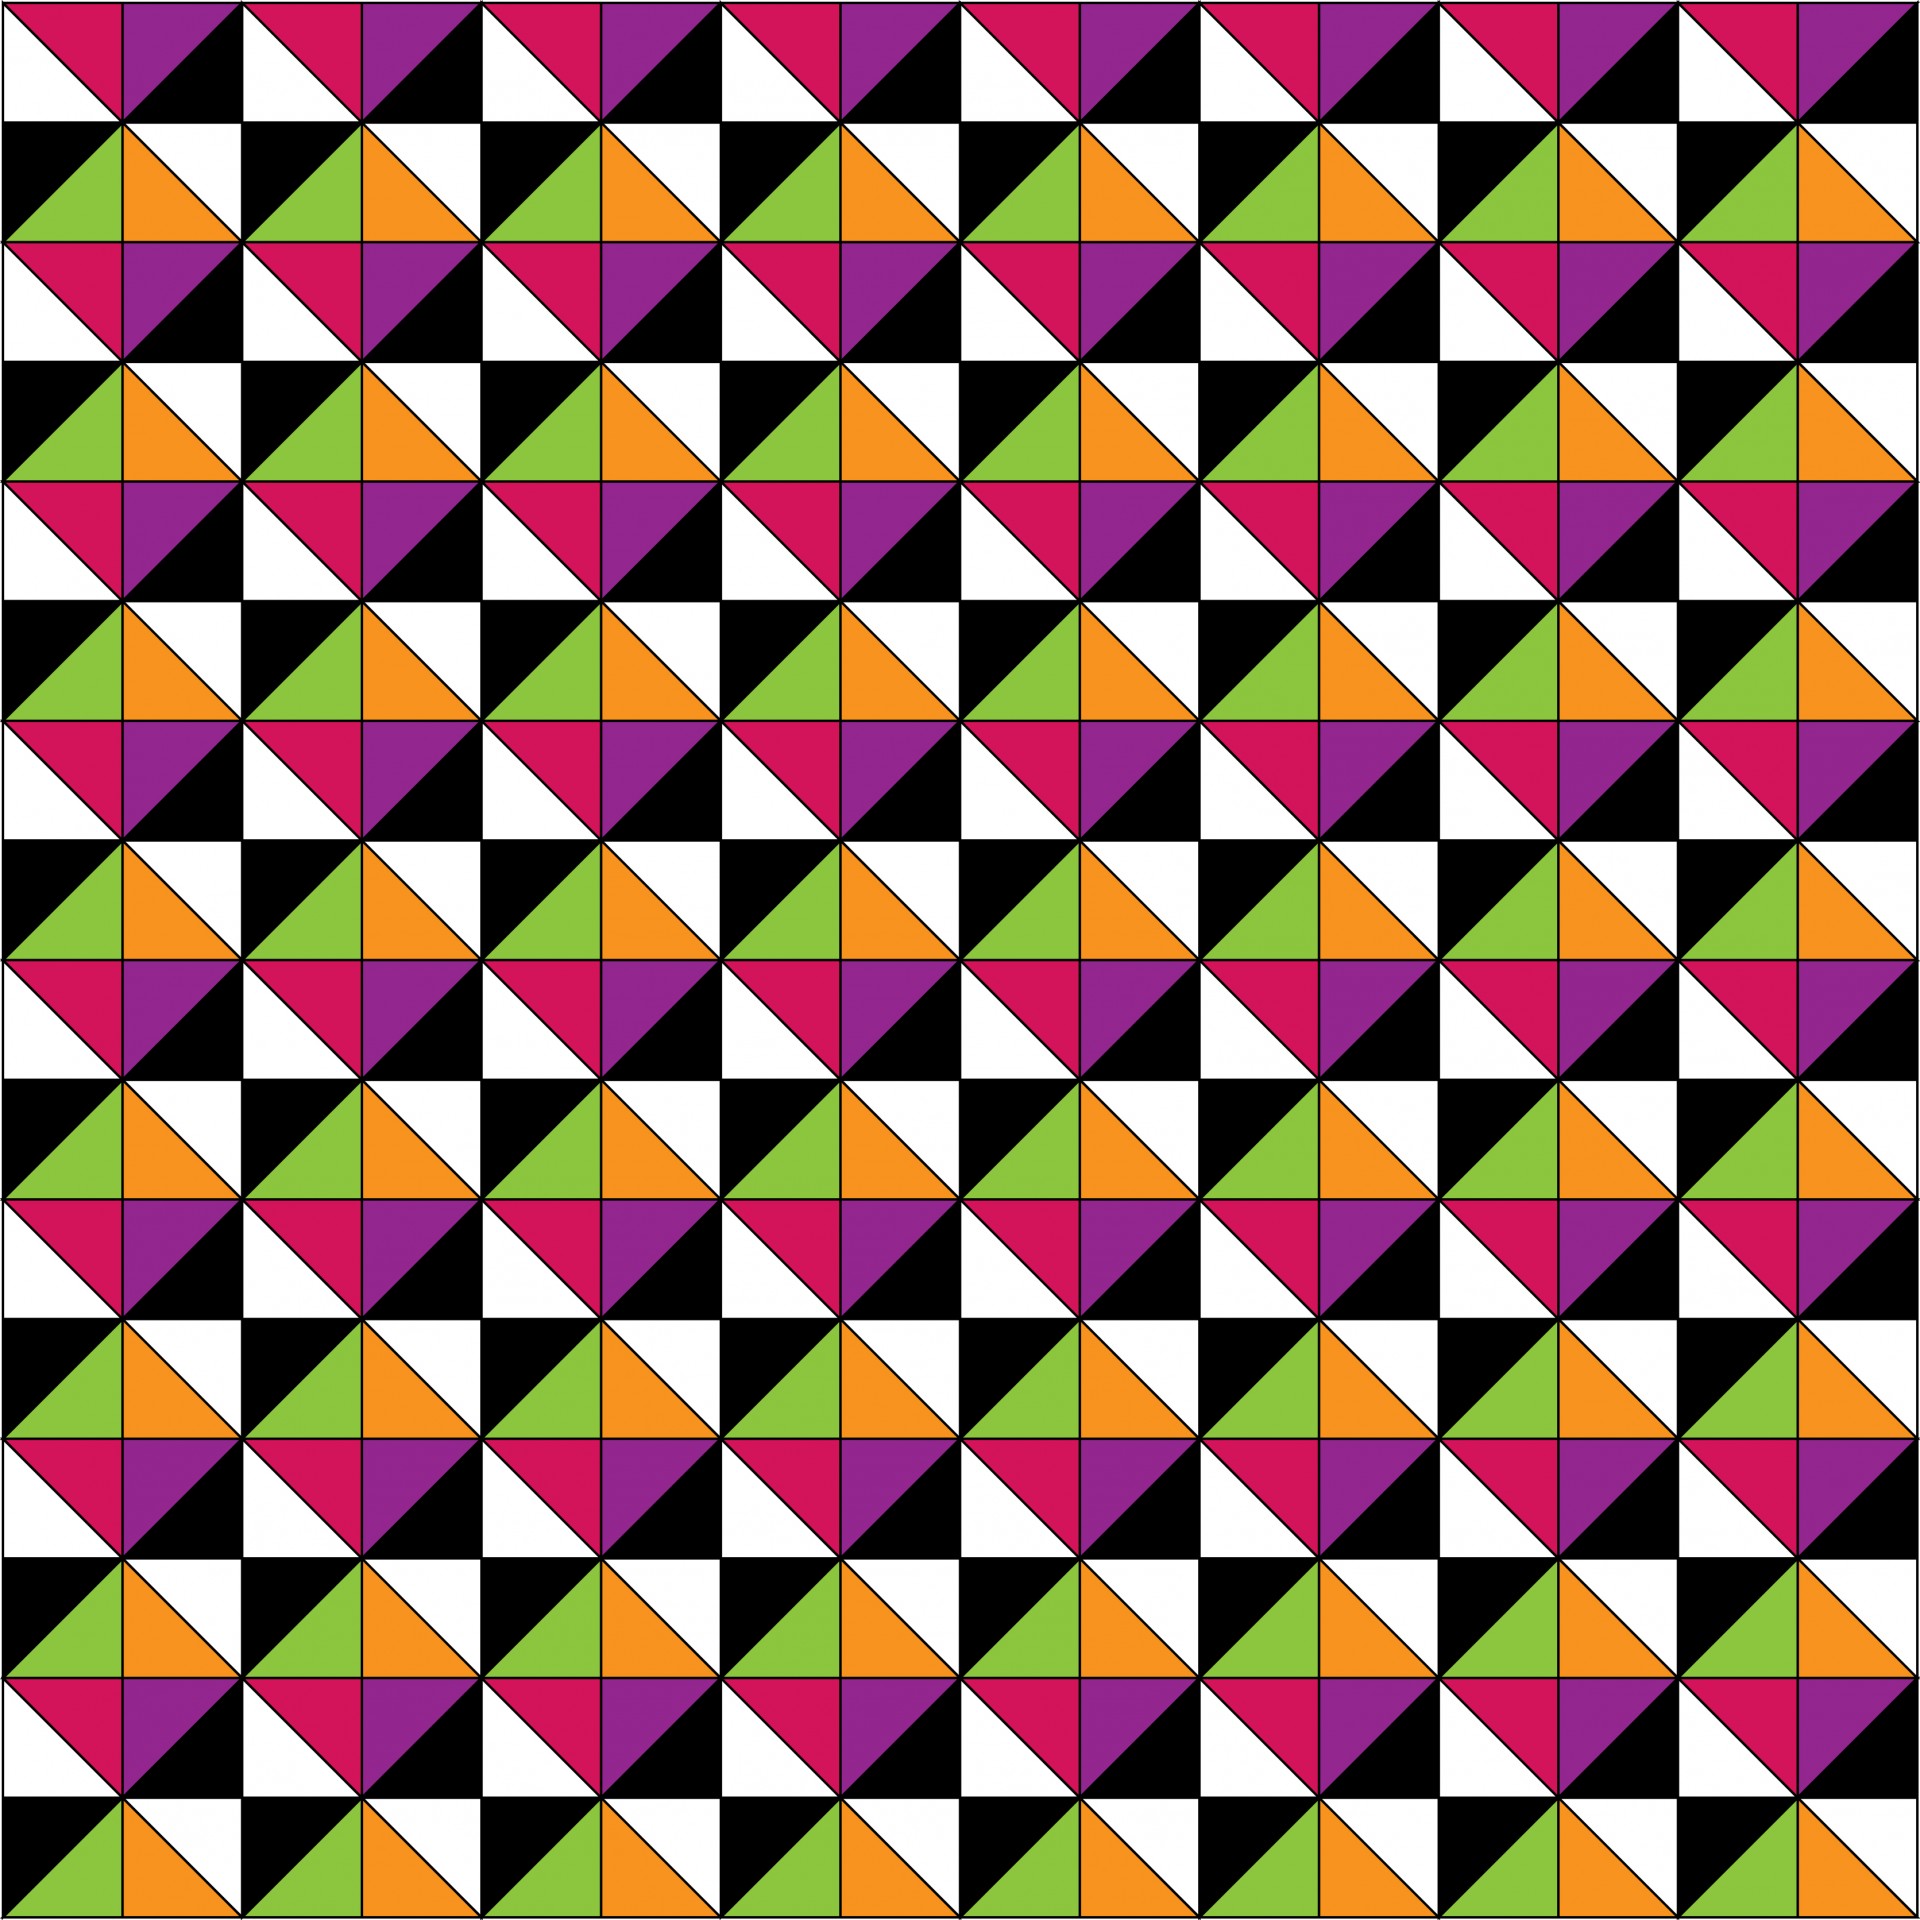 A colorful pattern of triangles and rectangle.